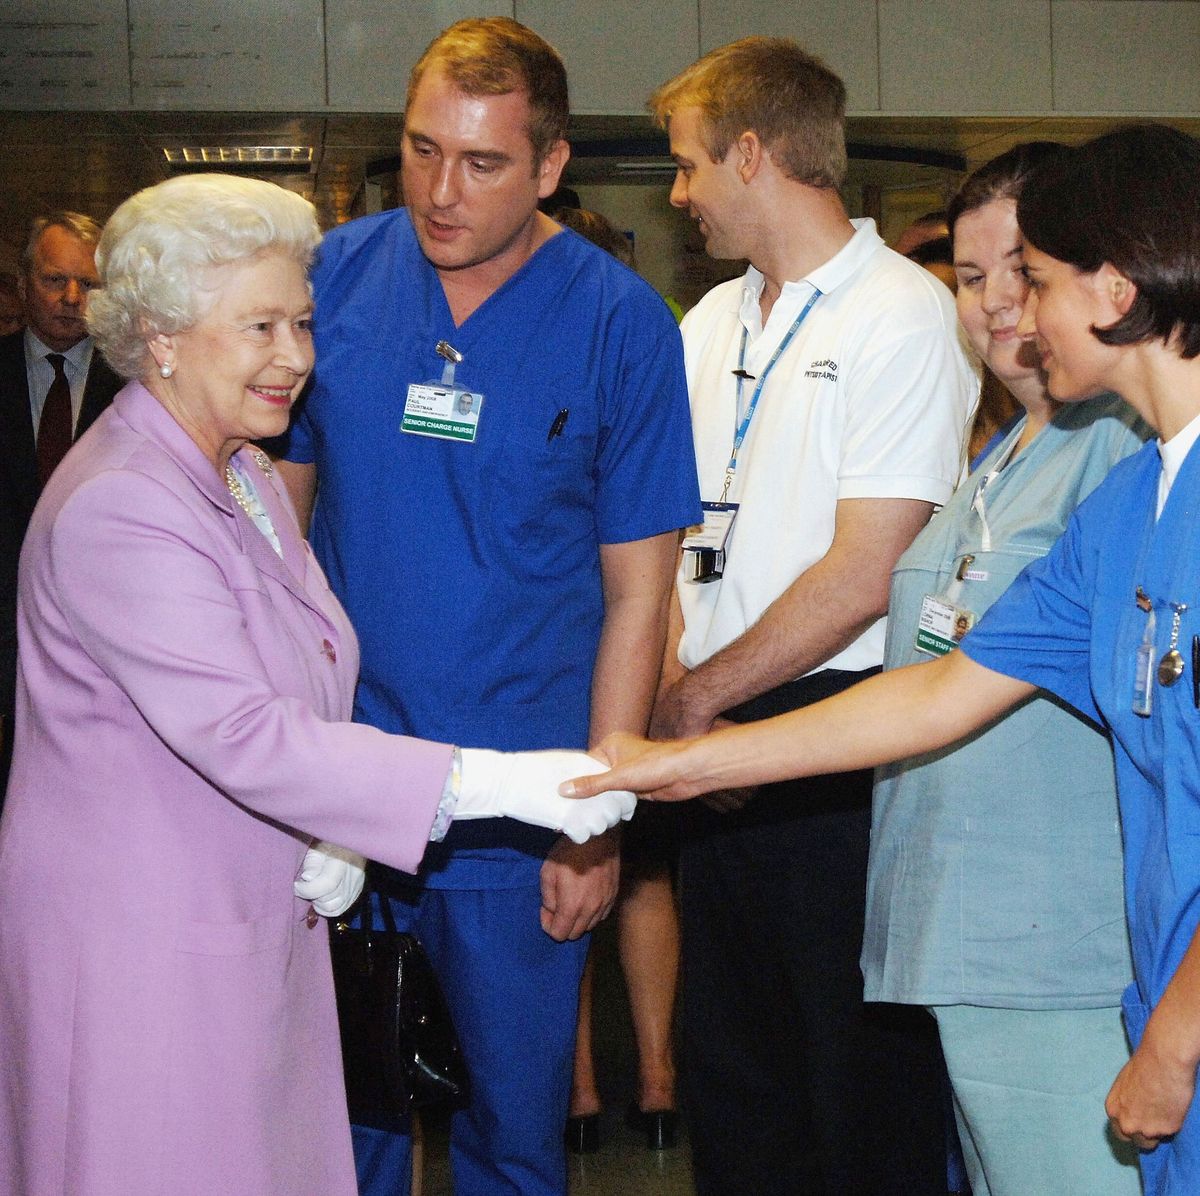 london, england   july 8  no uk sales for 28 days hm queen elizabeth ii, the queen, is introduced to accident and emergency staff a  e by senior charge nurse paul courtman during her visit to the royal london hospital to meet staff and victims of the terrorist bomb explosions on june 8, 2005 in london, england  photo by pooltim graham picture librarygetty images